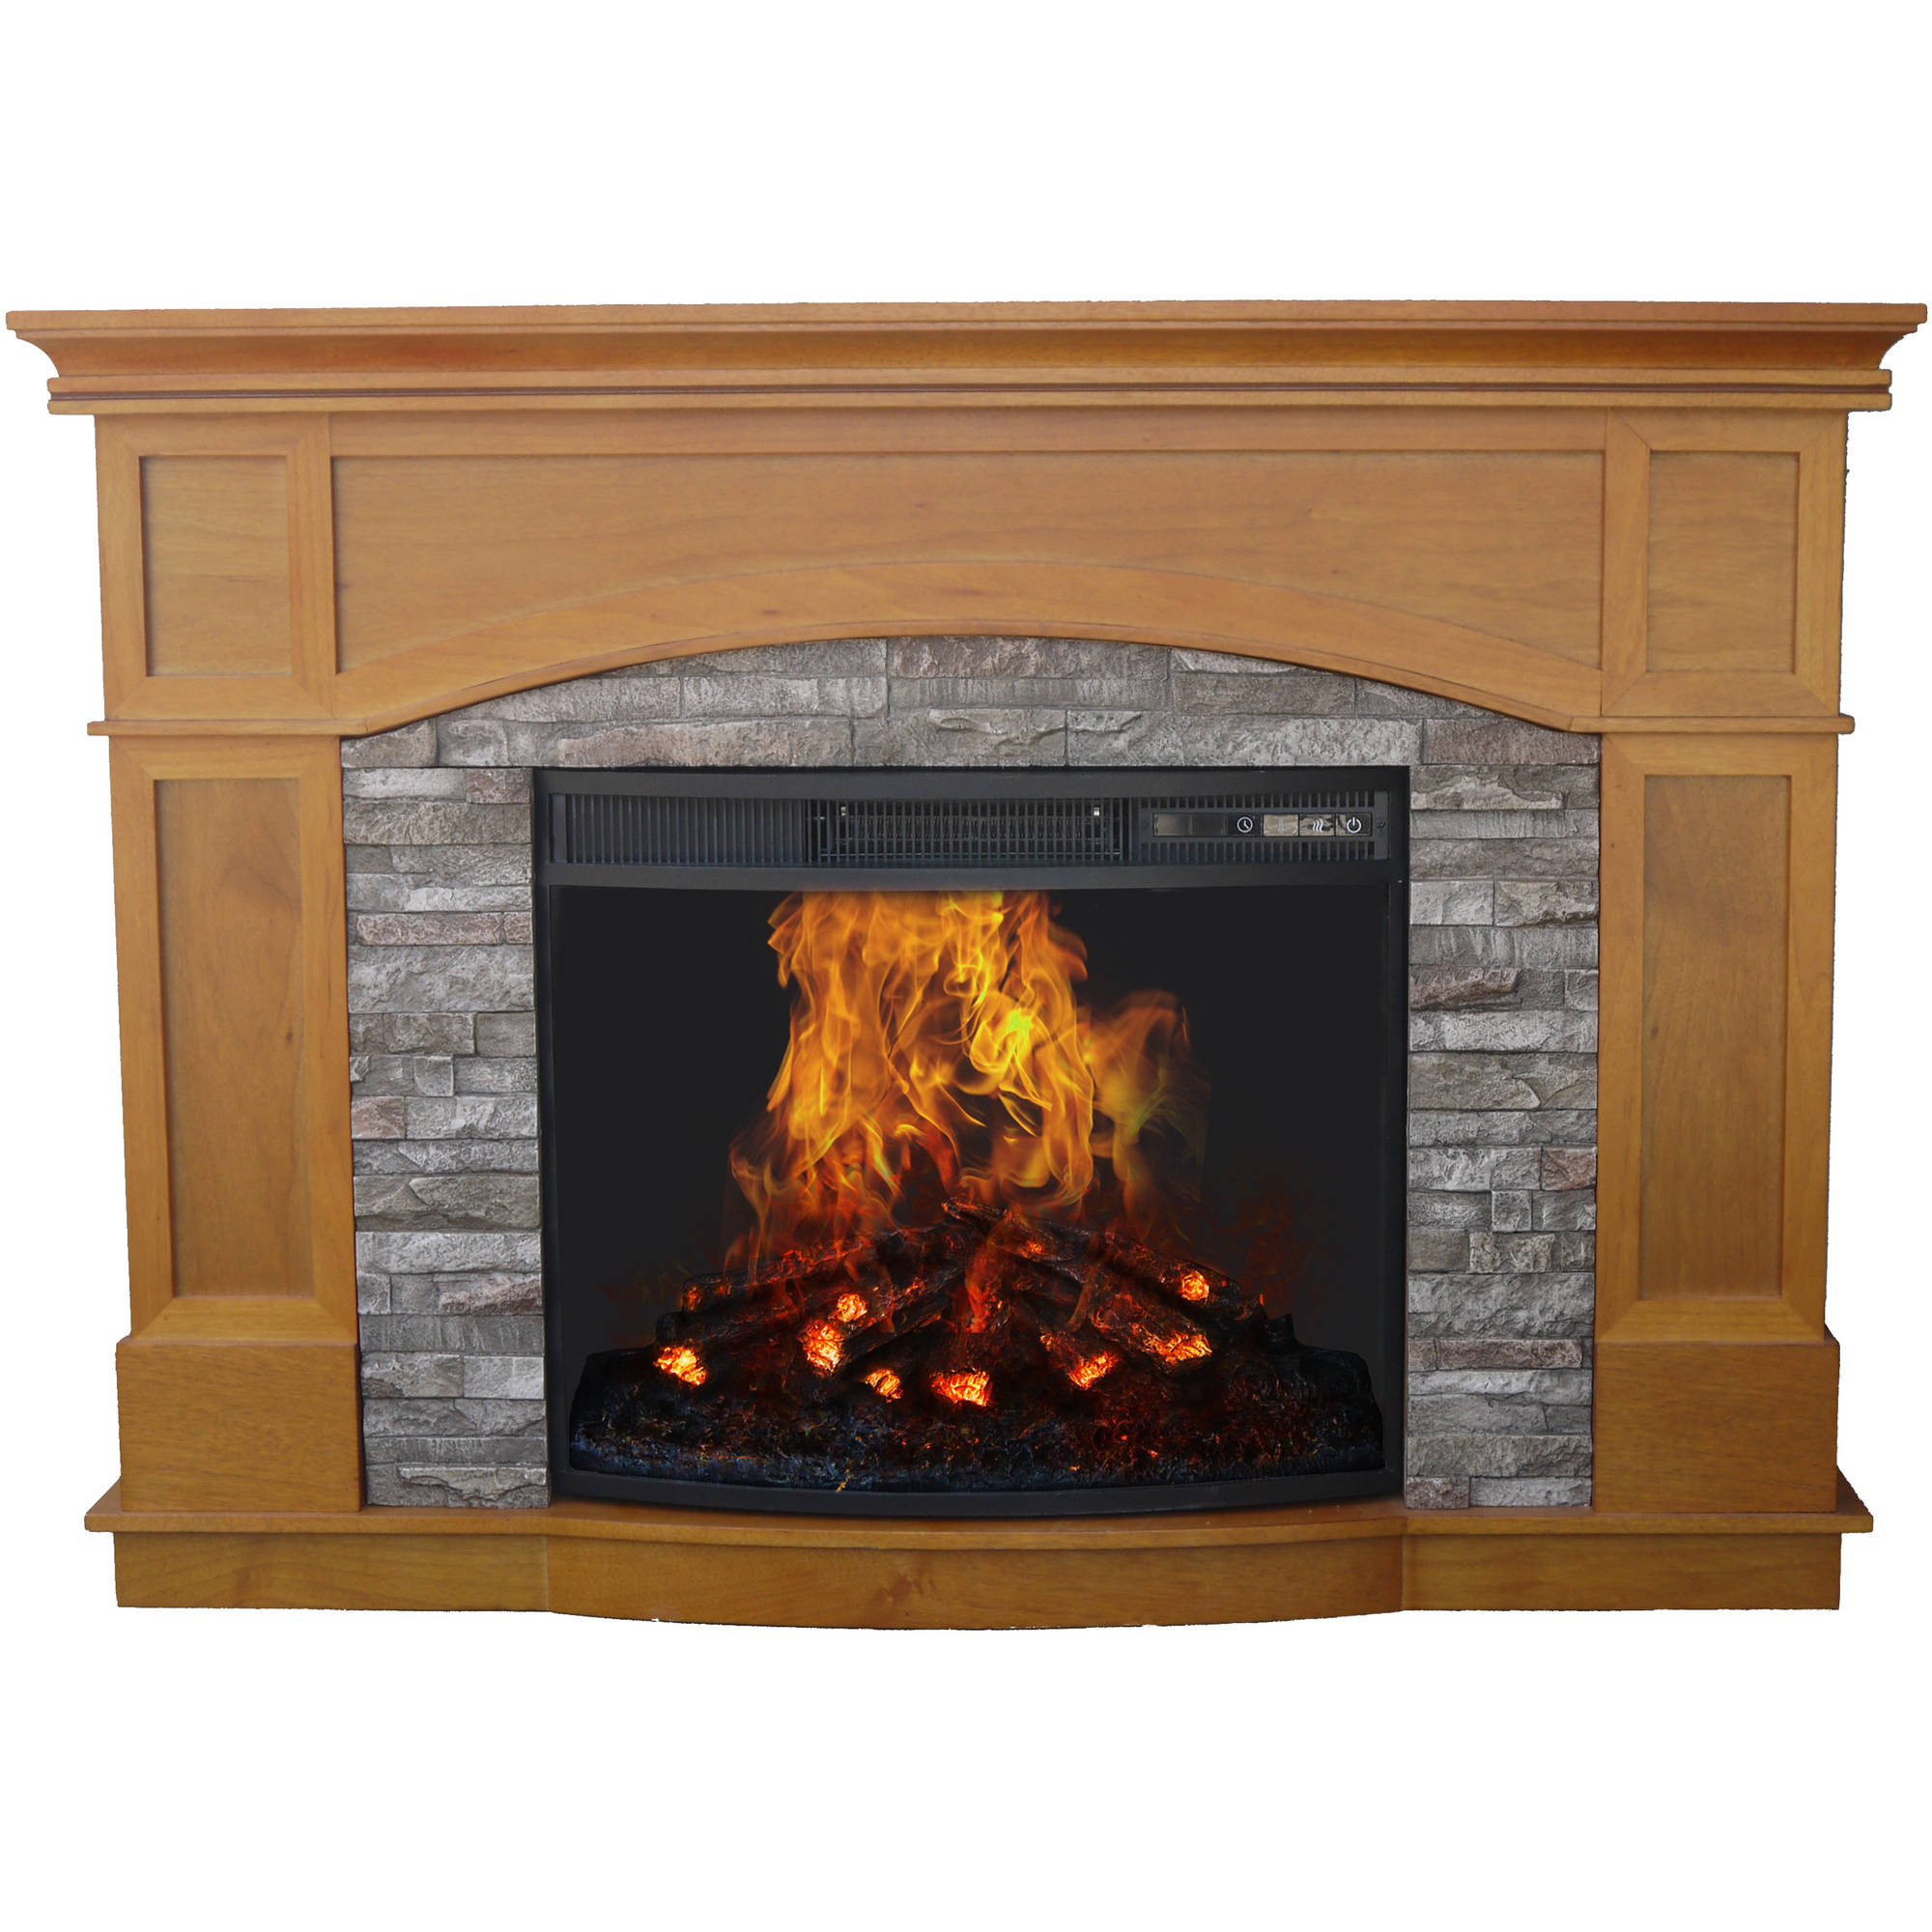 Decorative Electric Fireplace
 Decor Flame Electric Fireplace with 50" Mantle Walmart